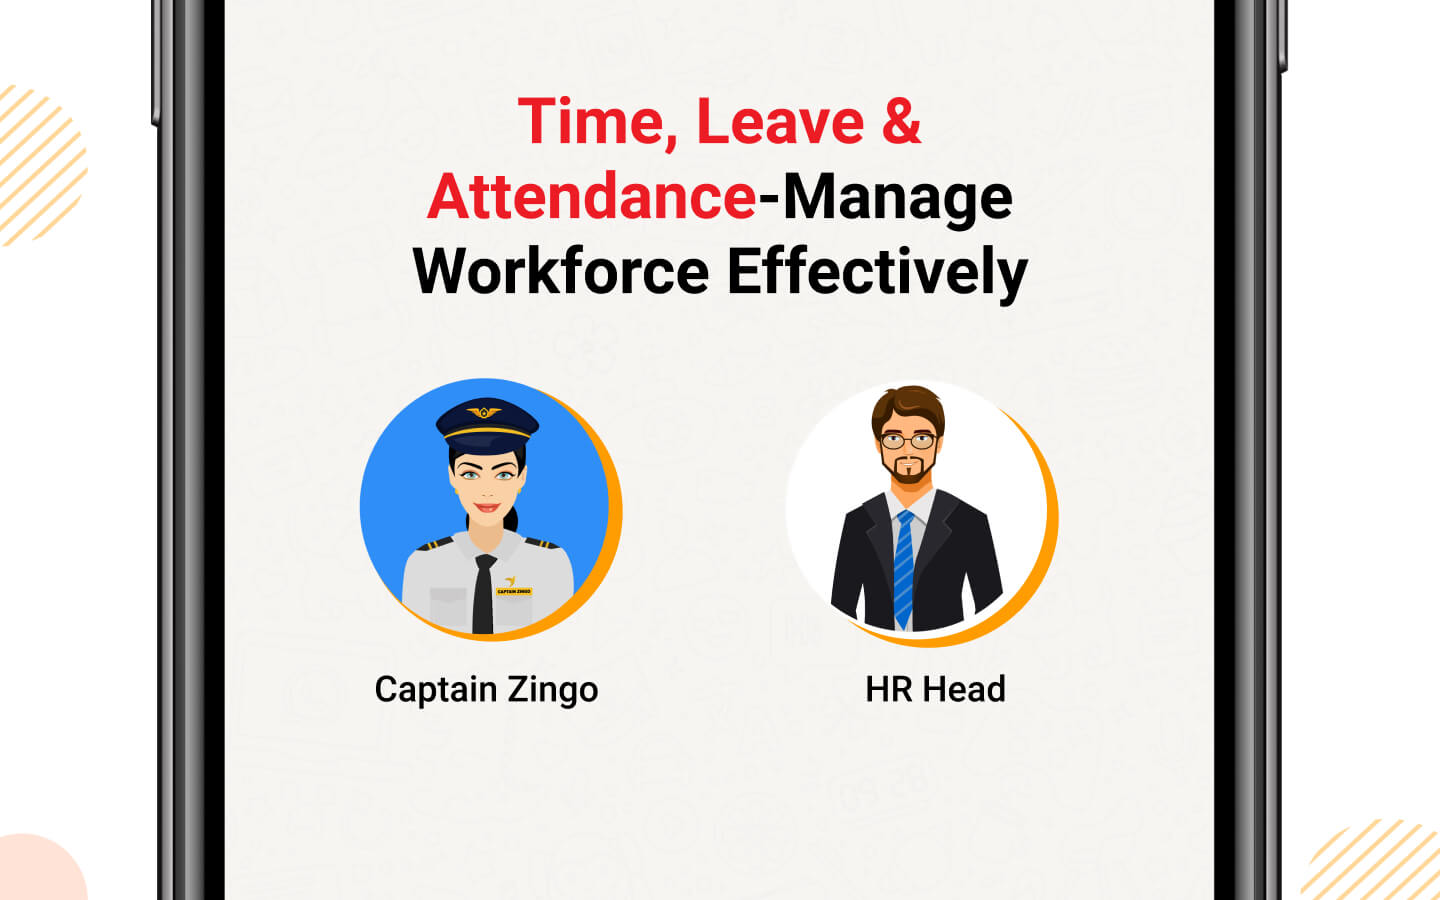 Time, Leave & Attendance-Manage Workforce Effectively